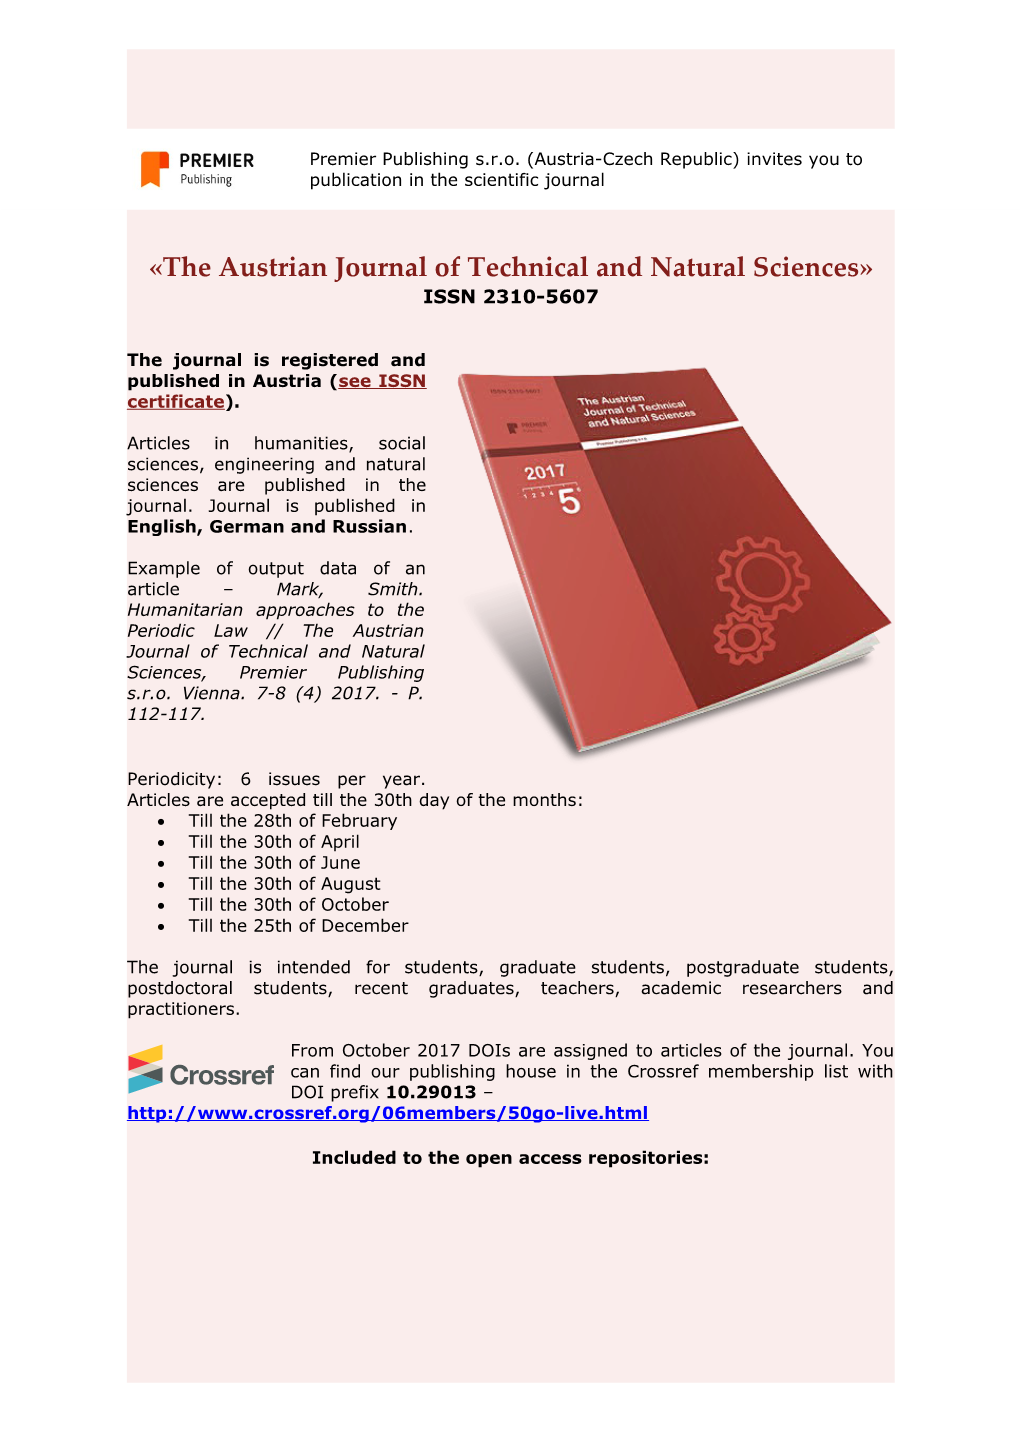 The Austrian Journal of Technical and Natural Sciences